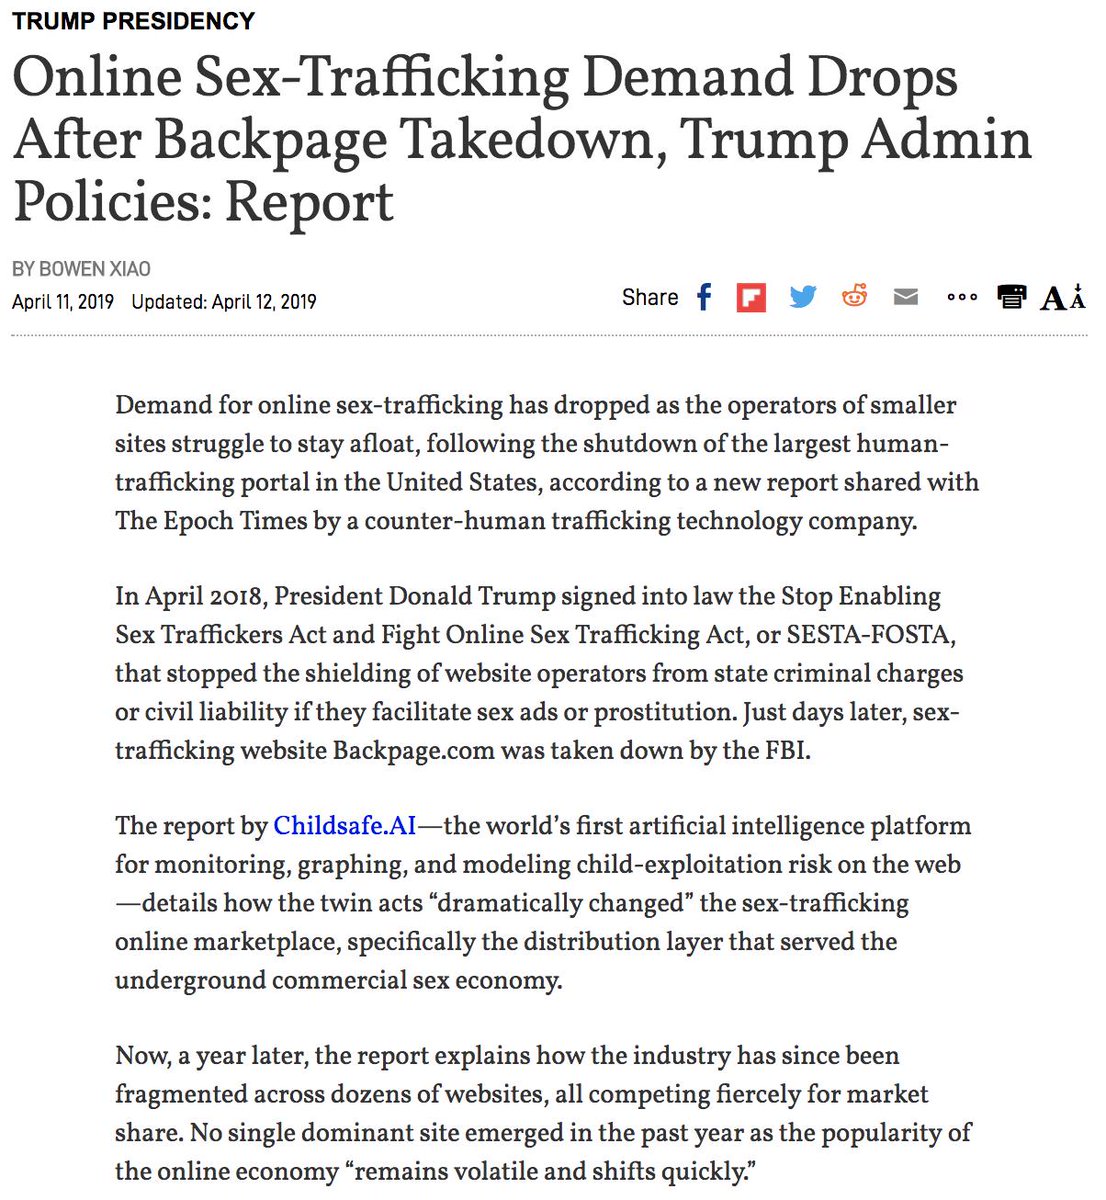 This follows the takedown of " http://Backpage.com " which was found to have been facilitating a large portion of sex trafficking in the United States.This leads us to the need to reexamine other key Trump policy goals.How do you get children into the country to traffic?